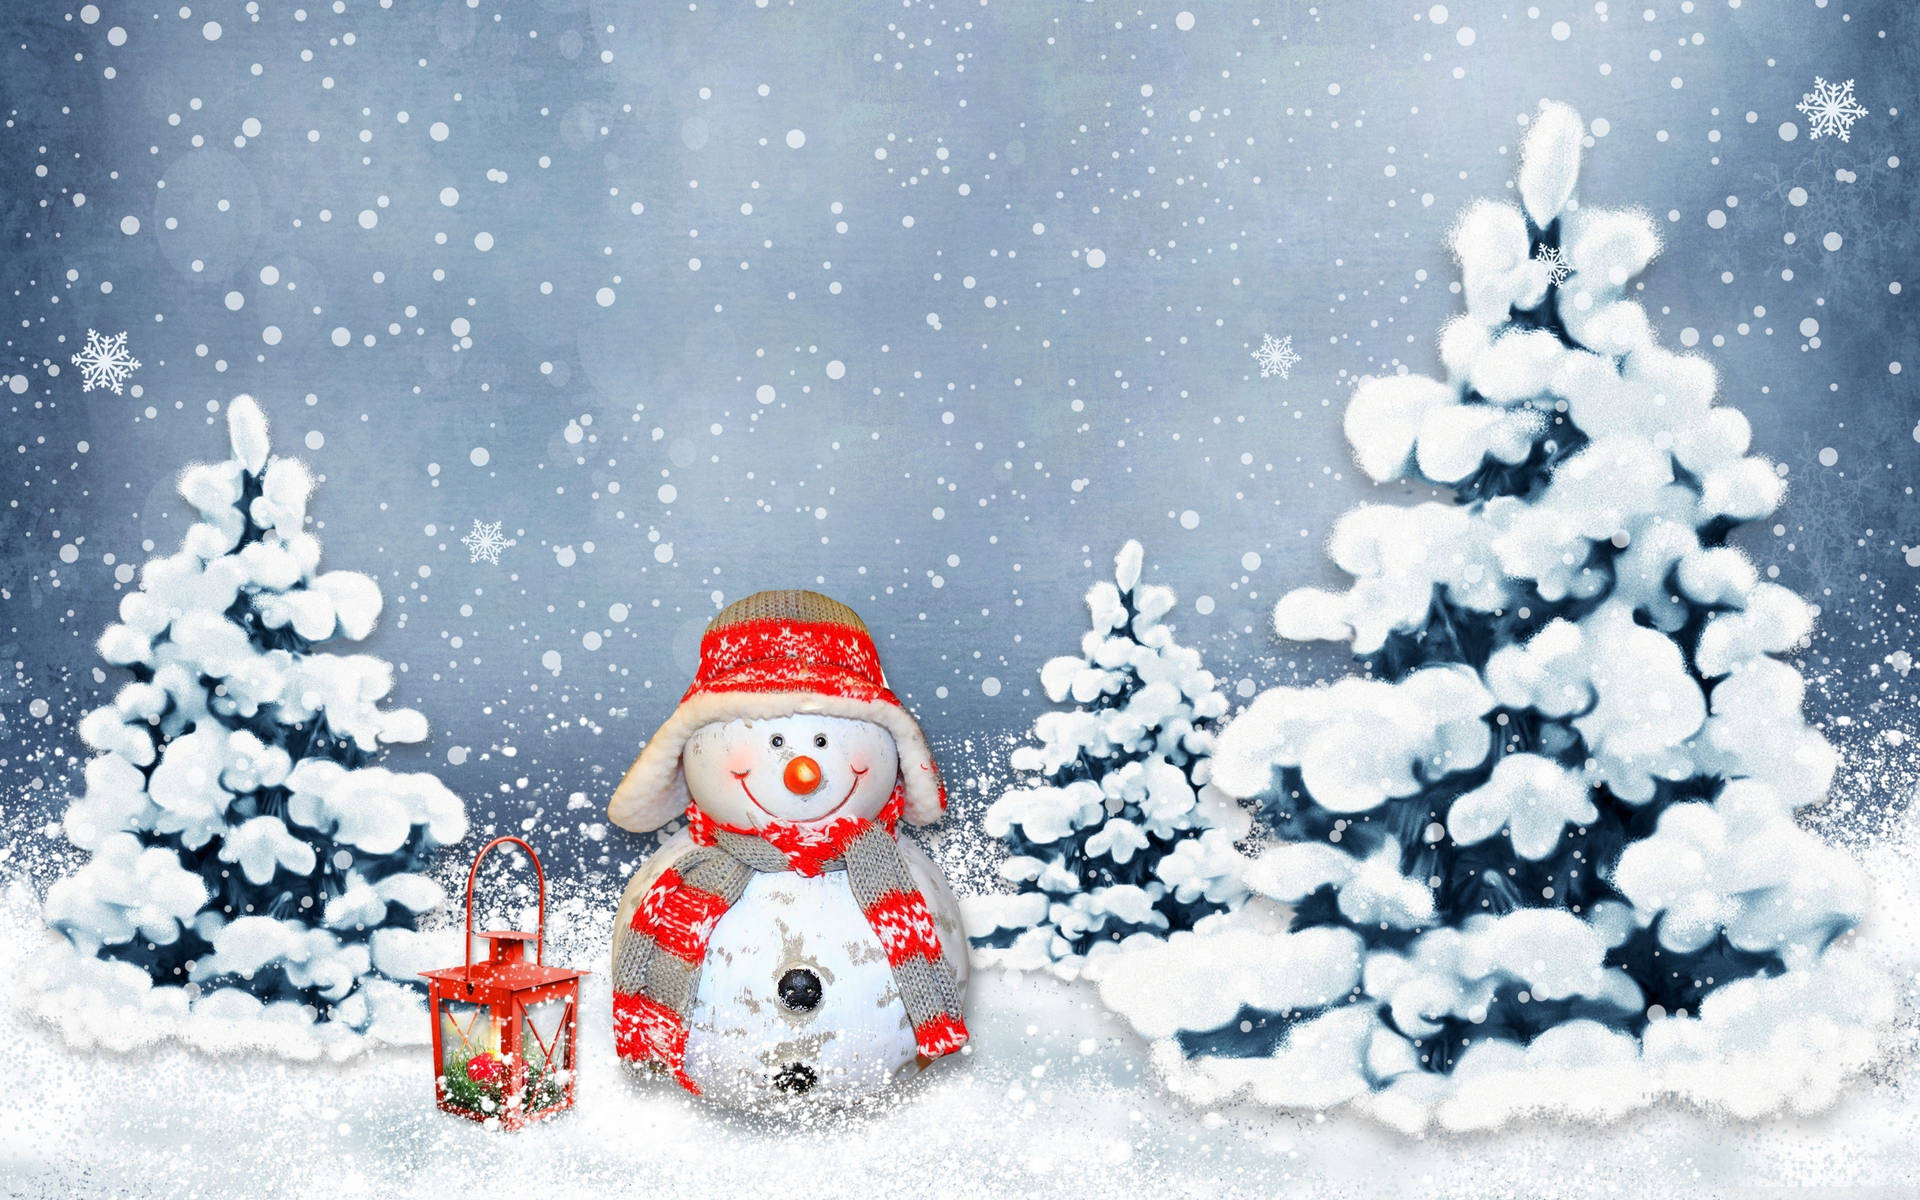 Snowman With Red Lamp Wallpaper